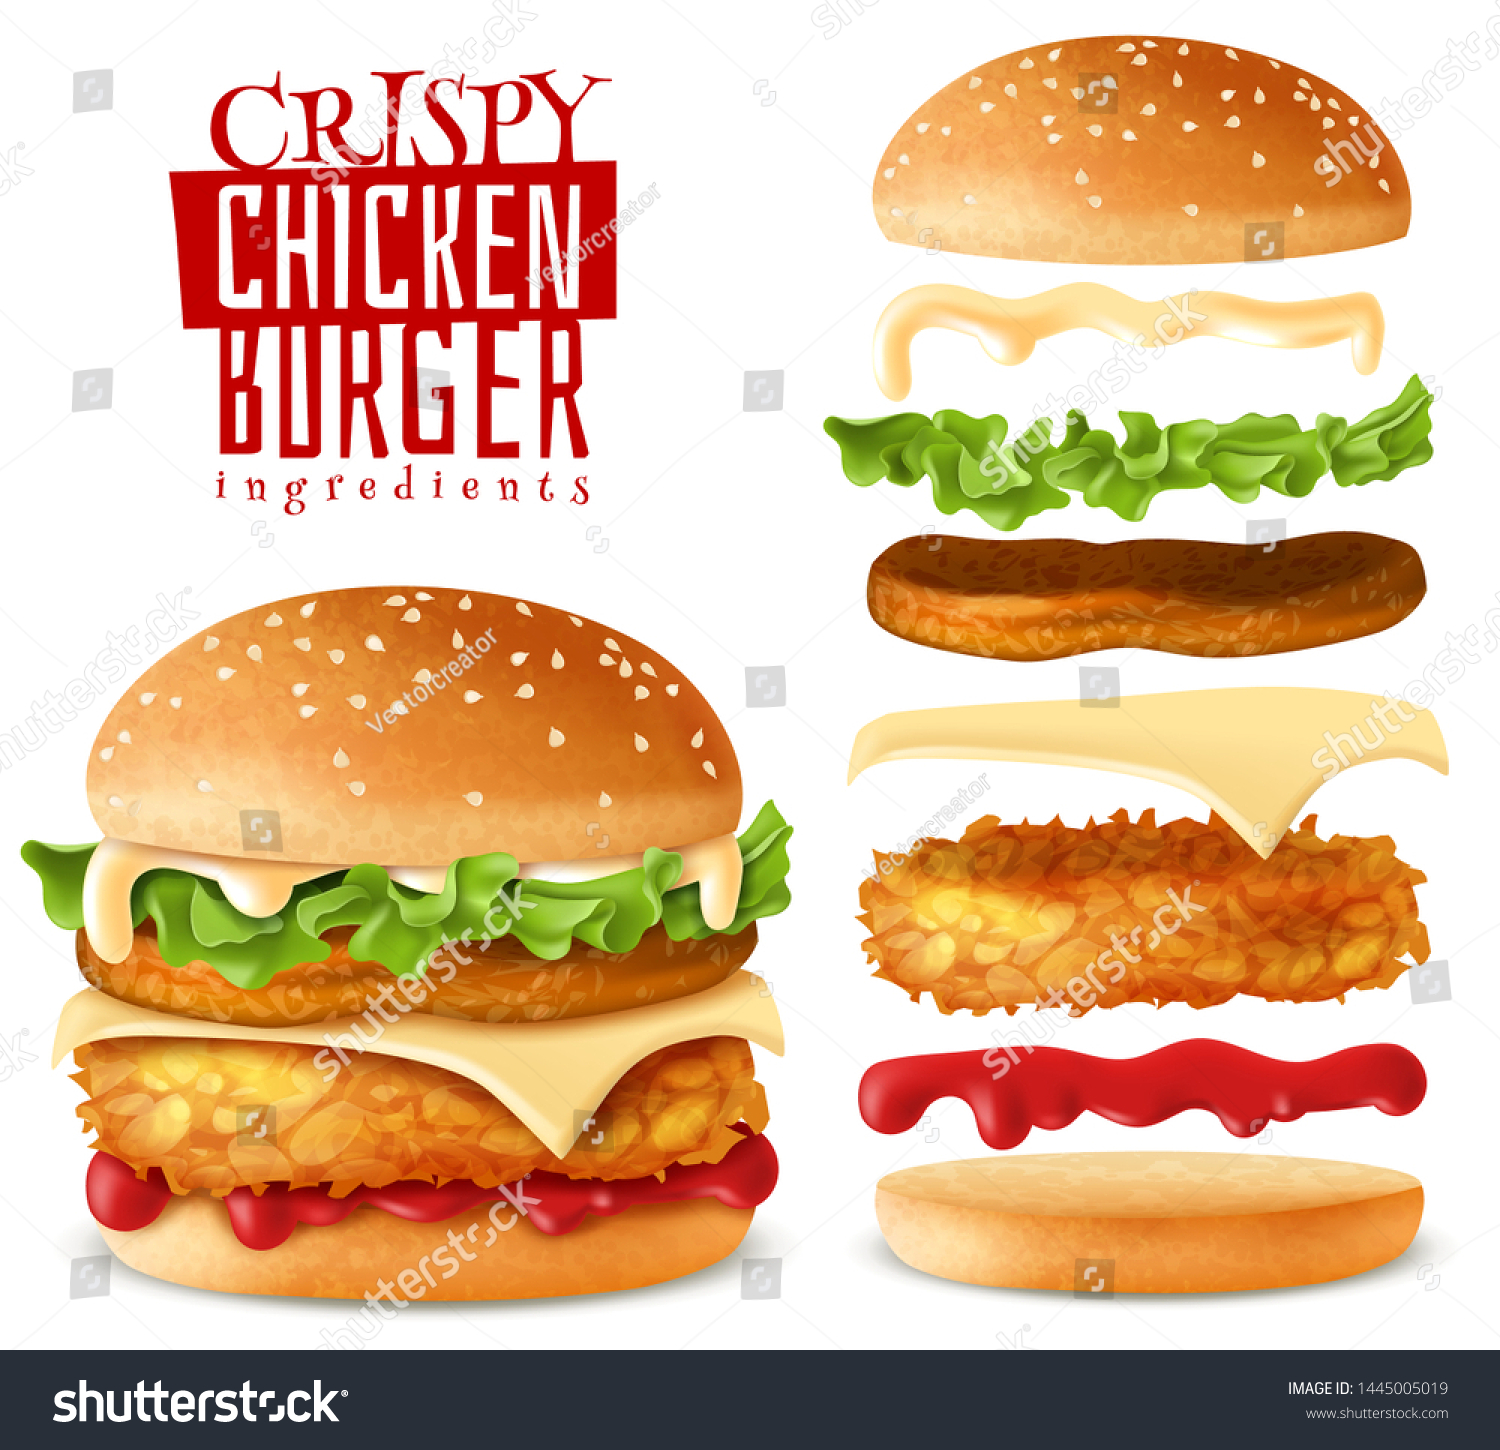 SVG of Burger maker constructor crispy chicken cutlet with isolated elements which are easy to change and move on white background with separate isolated ingredients. Vector svg